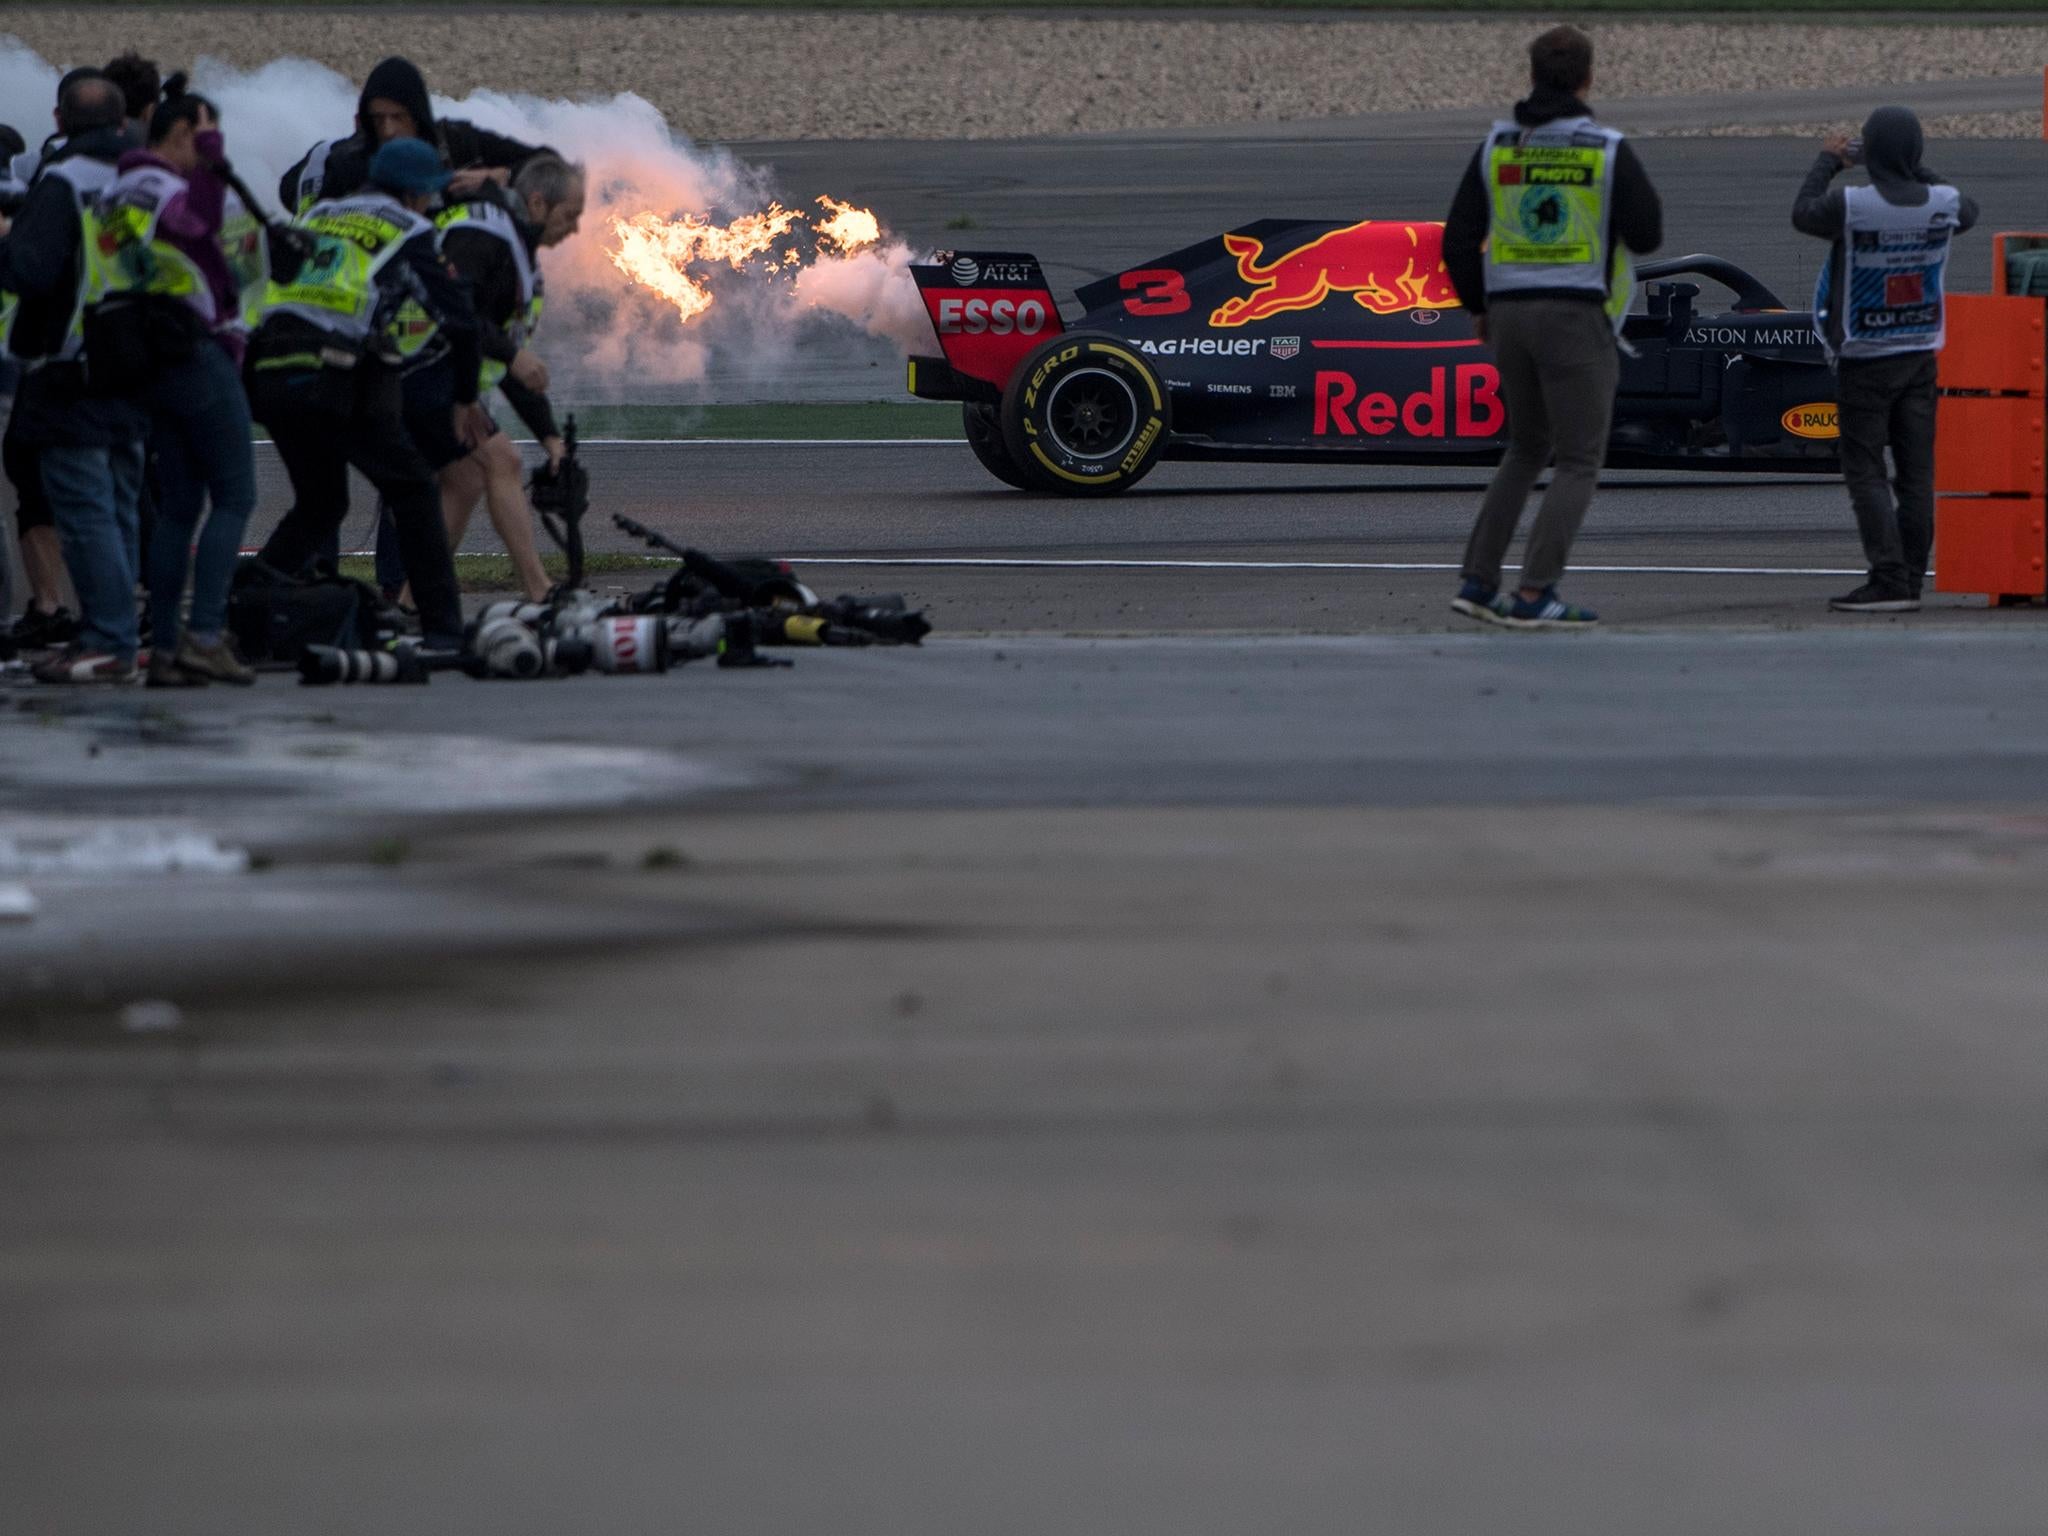 Flames shoot out the back of Ricciardo's Red Bull after its Renault engine blows up